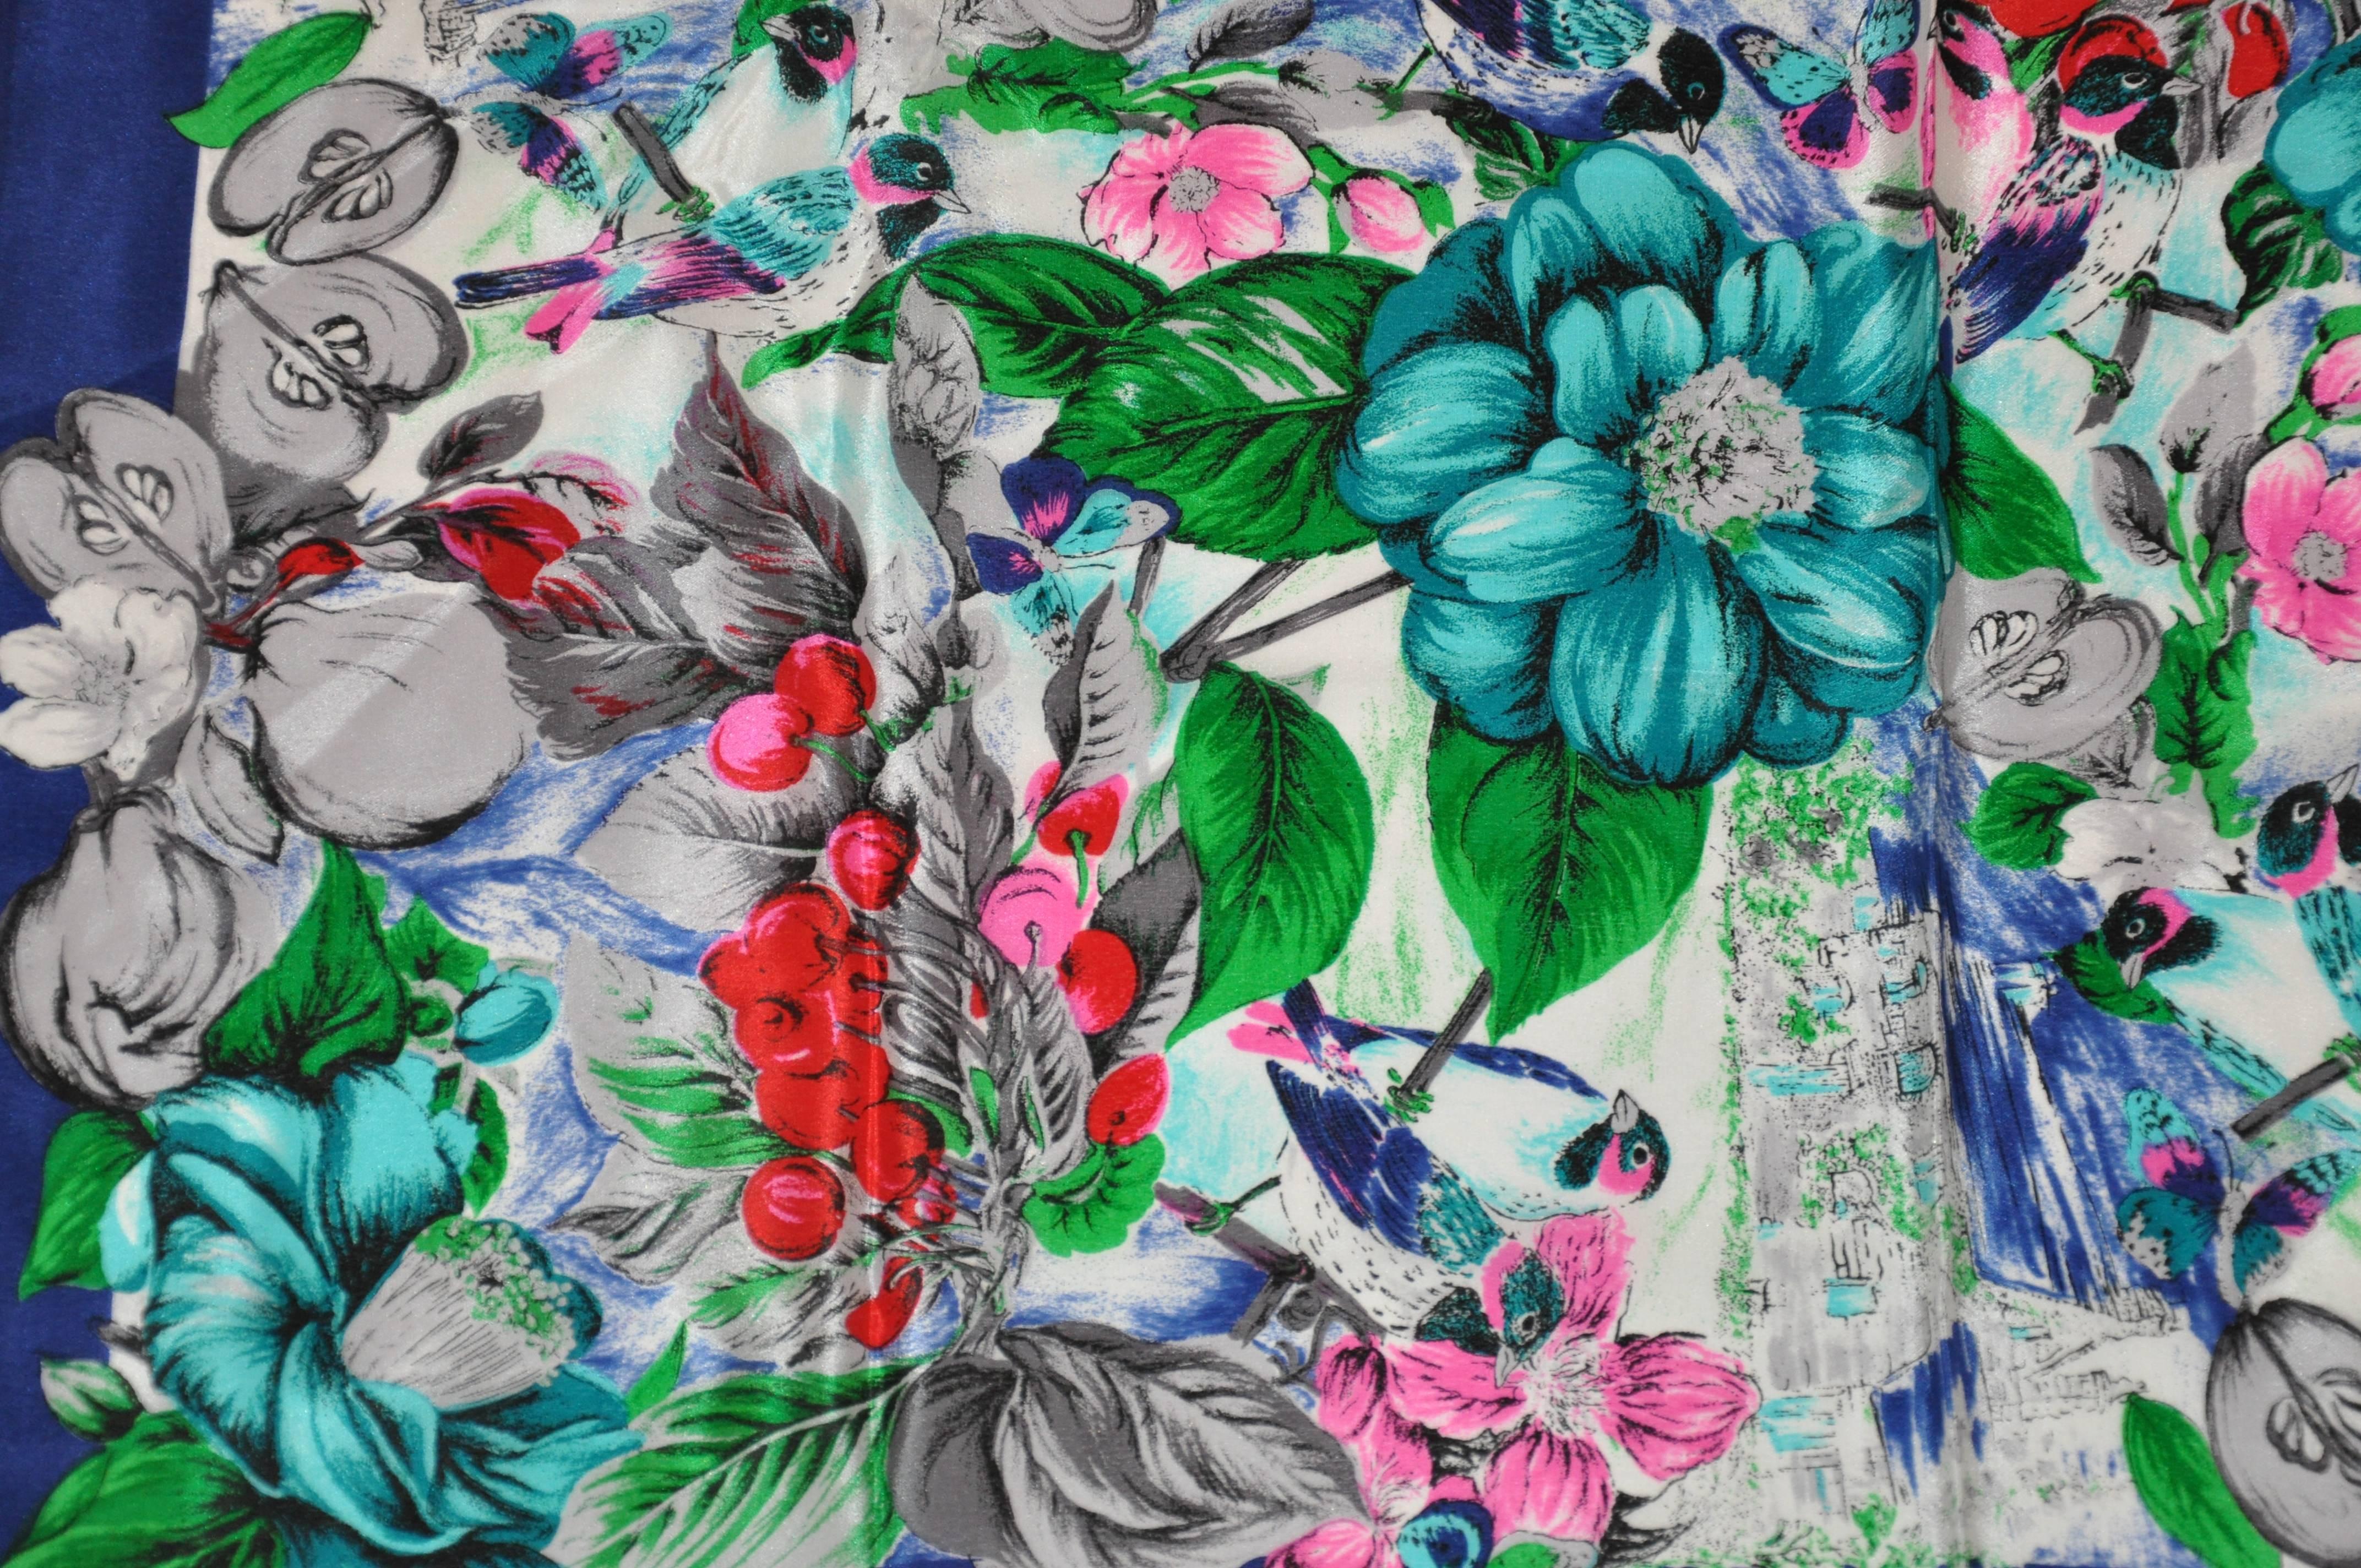 "Garden of Fruits, Flowers & Birds" silk scarf measures 30" x 30" and finished with hand-rolled edges. Made in Italy.